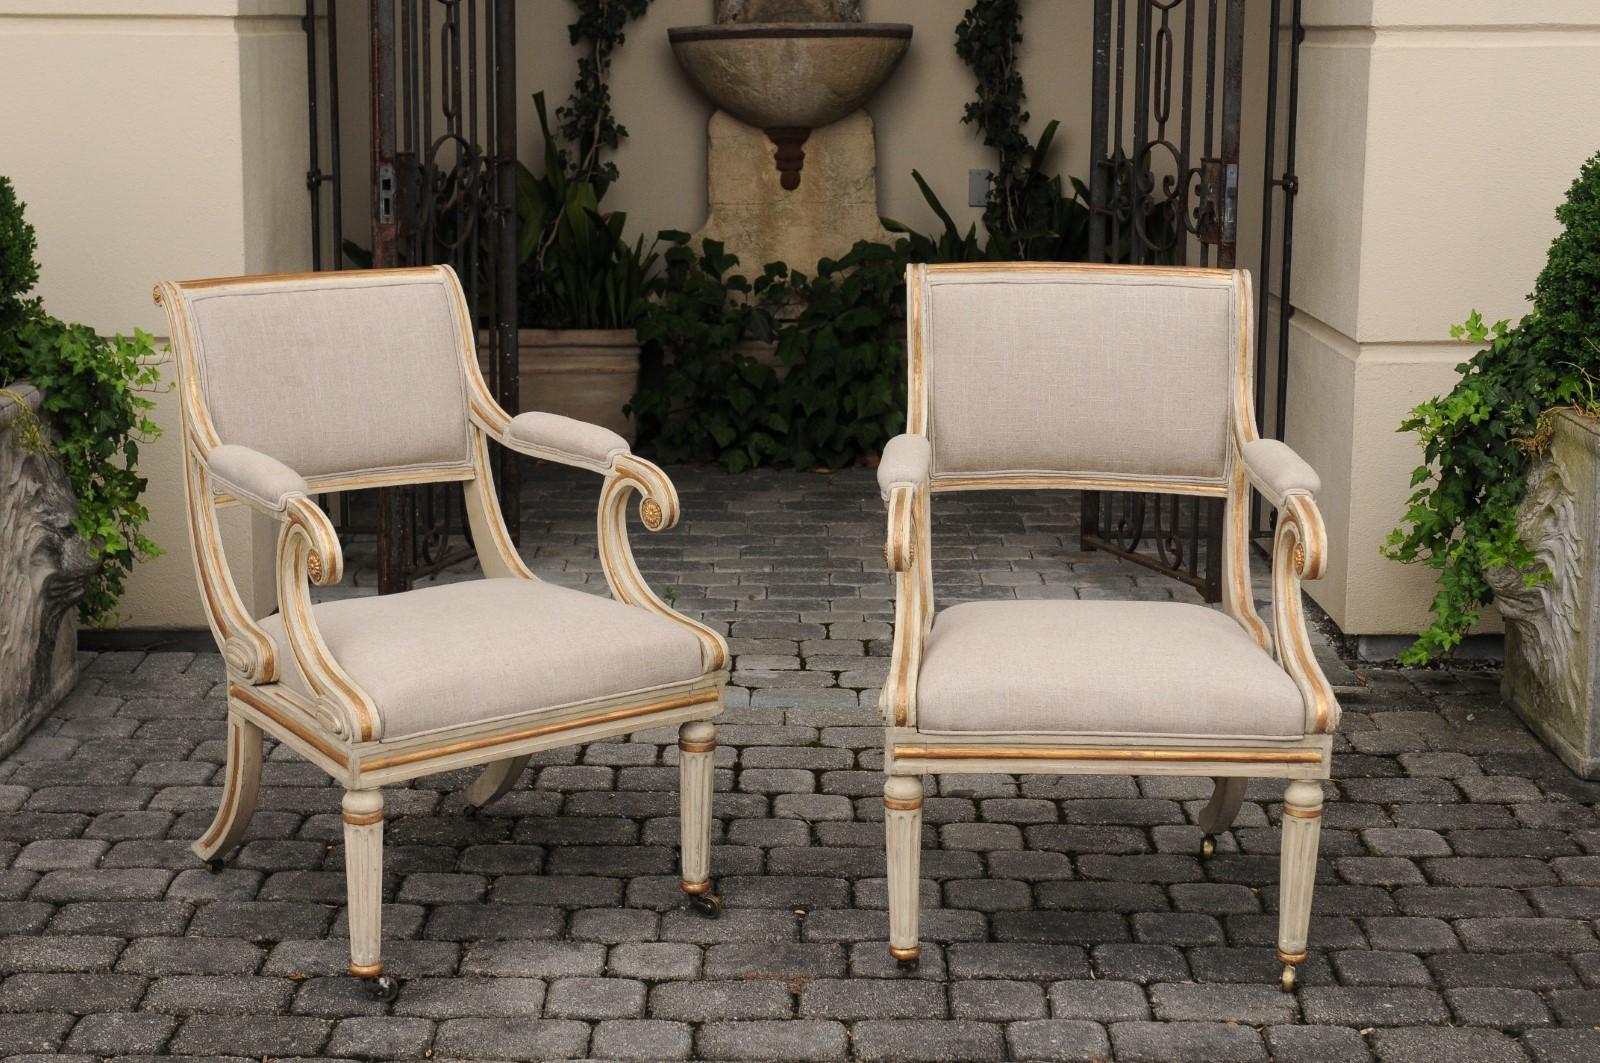 A pair of Regency style English painted wood parcel-gilt armchairs from the early 20th century, with scrolling arms, rosettes, fluted and saber legs, casters and new upholstery. Born in England at the Turn of the century, each of these two armchairs